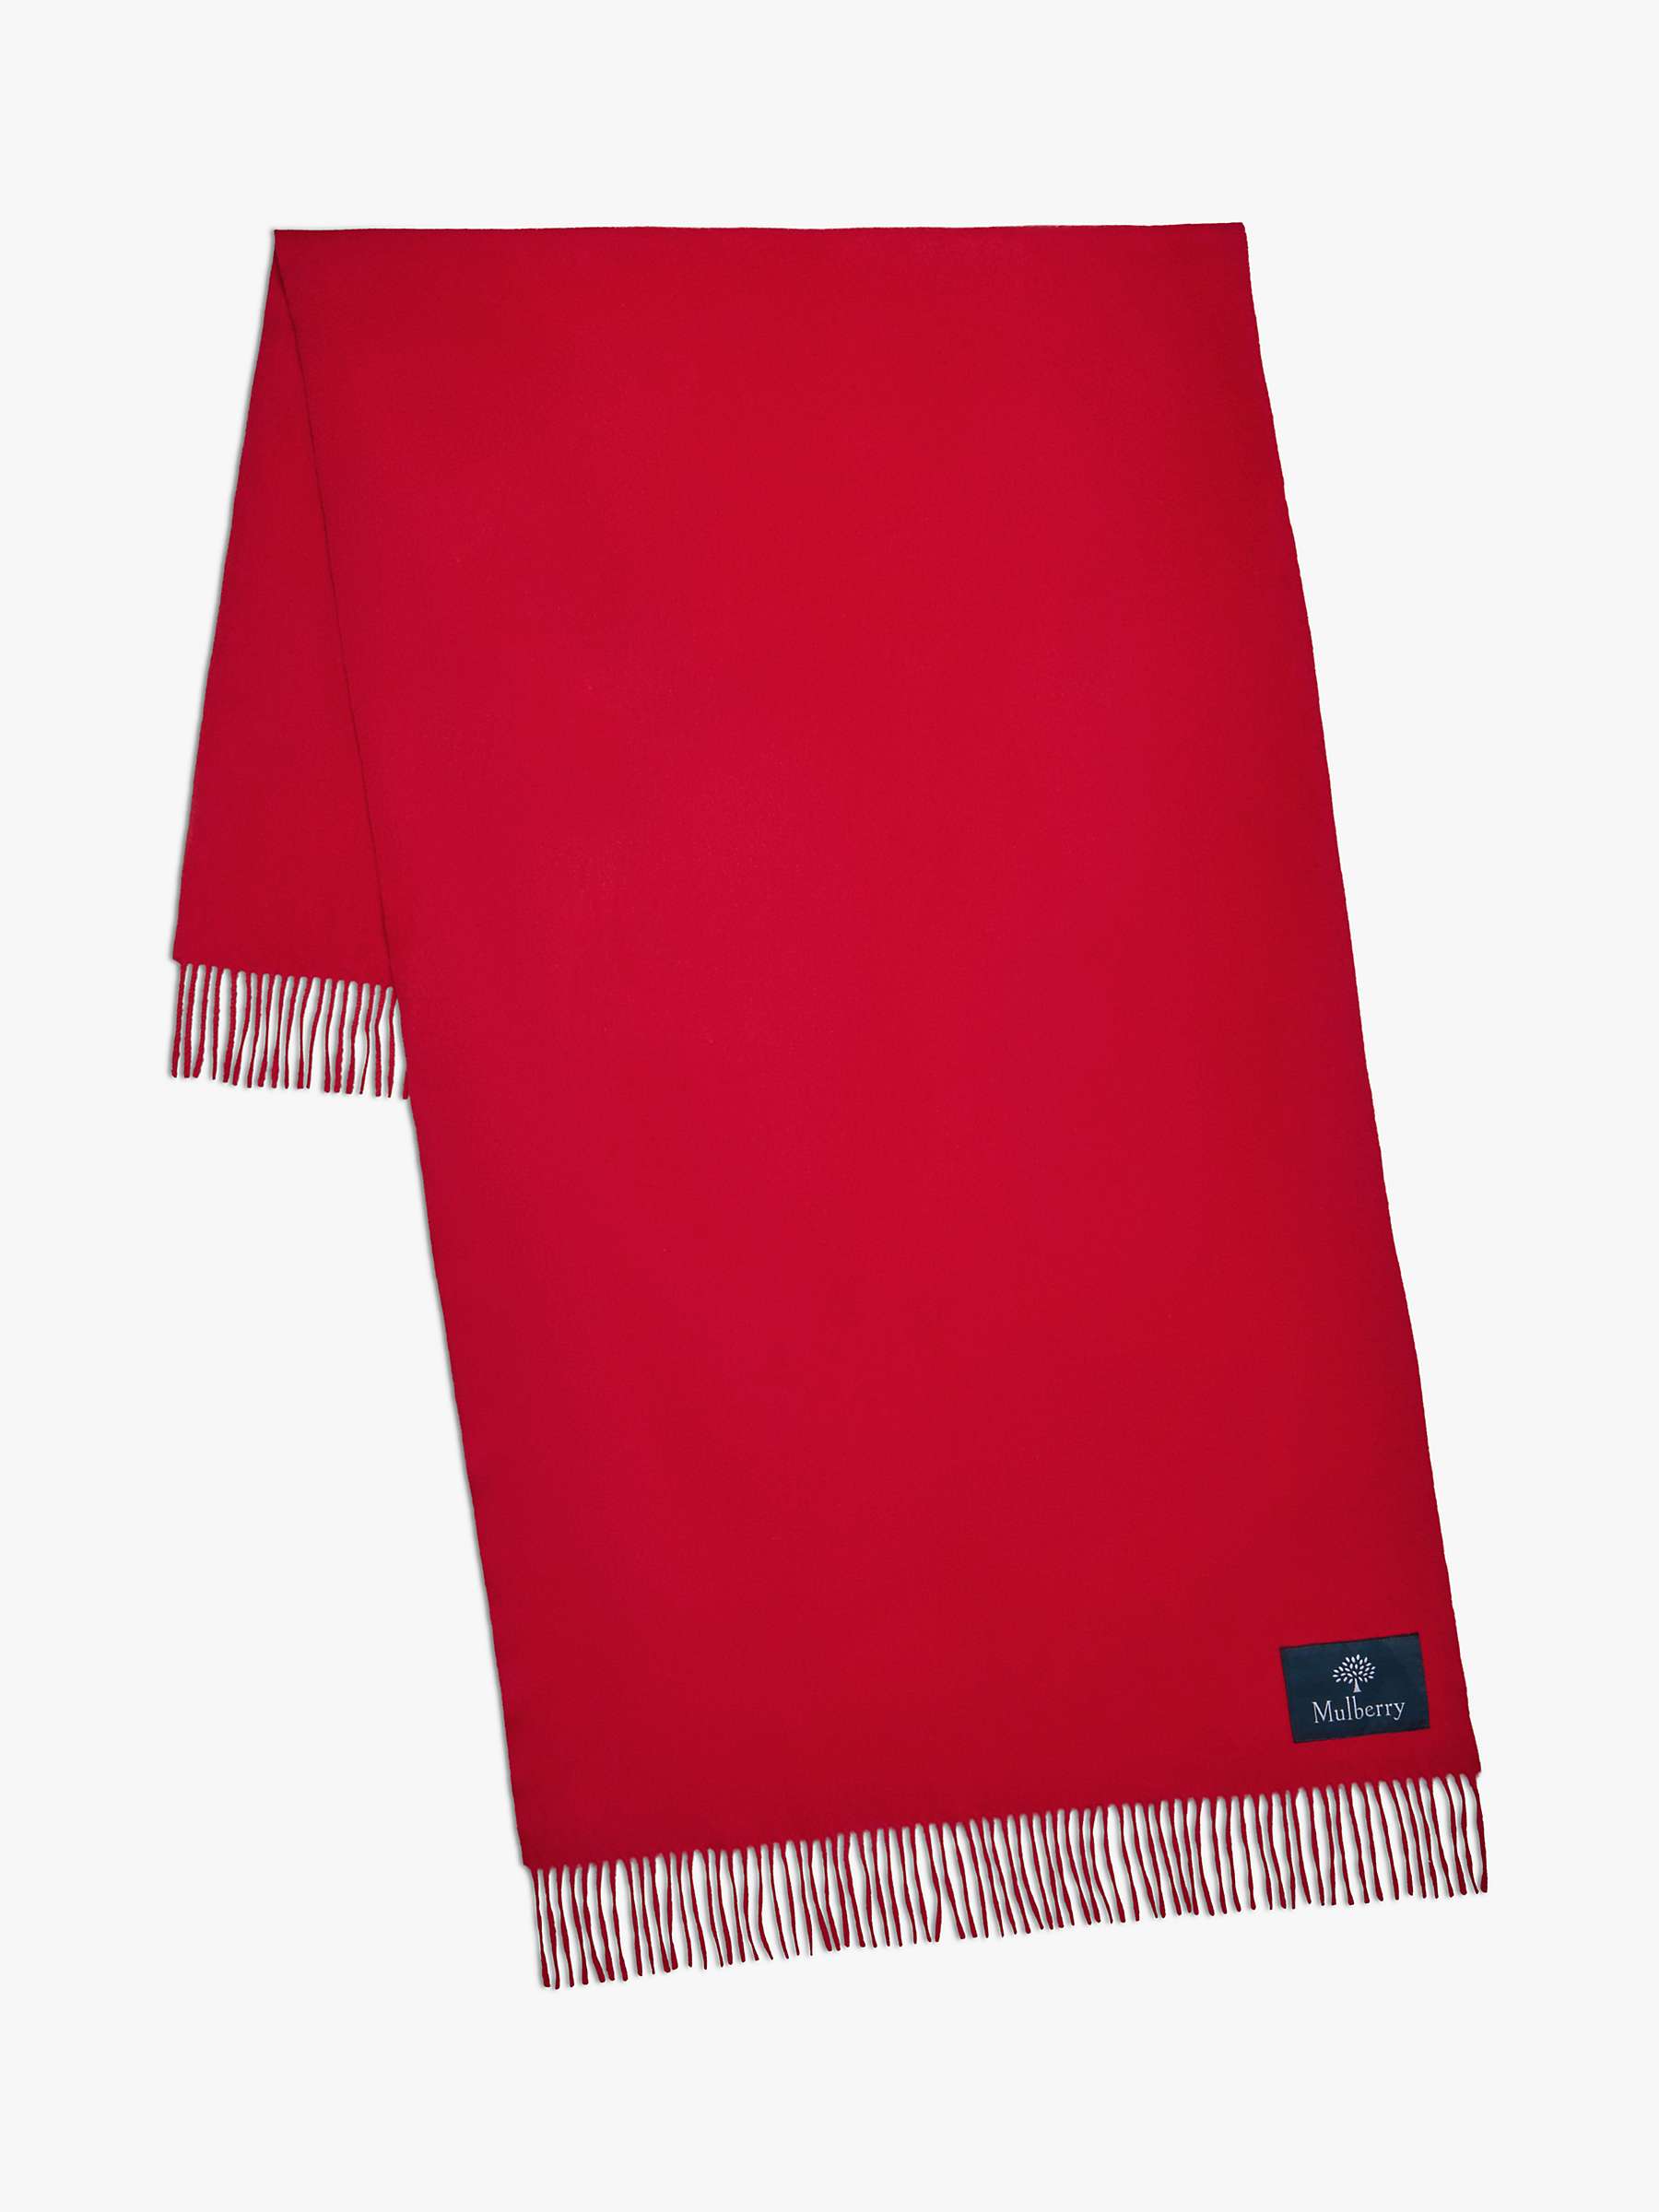 Buy Mulberry Solid Lambswool Scarf Online at johnlewis.com